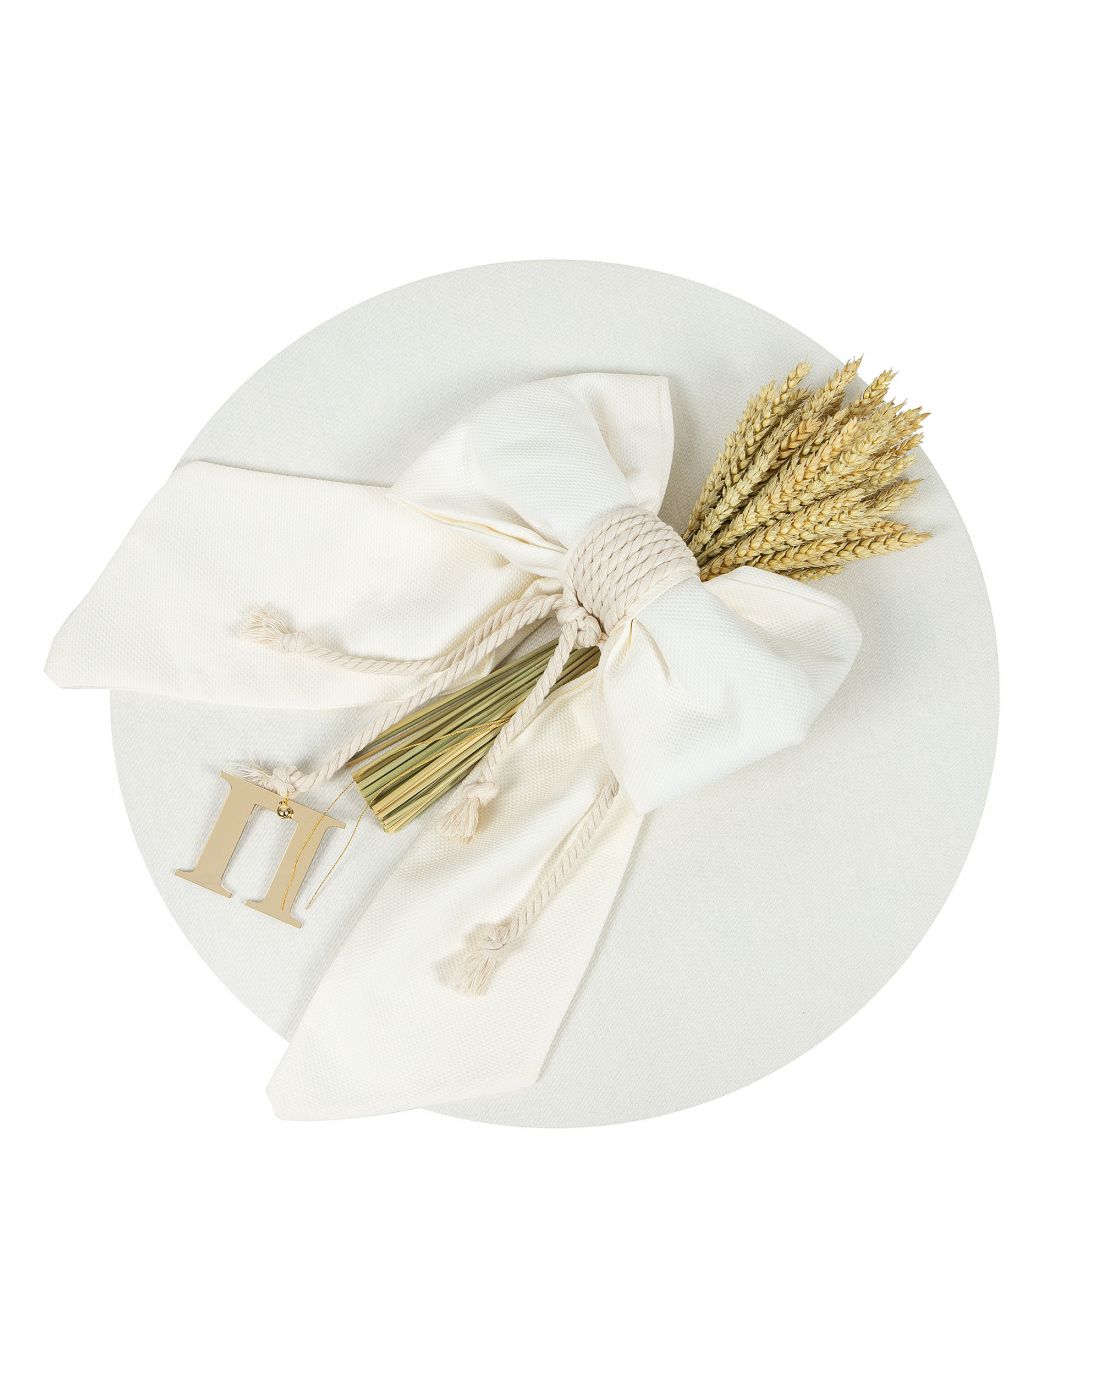 Lapin House Bapteme Decoration with Monogram and Straws